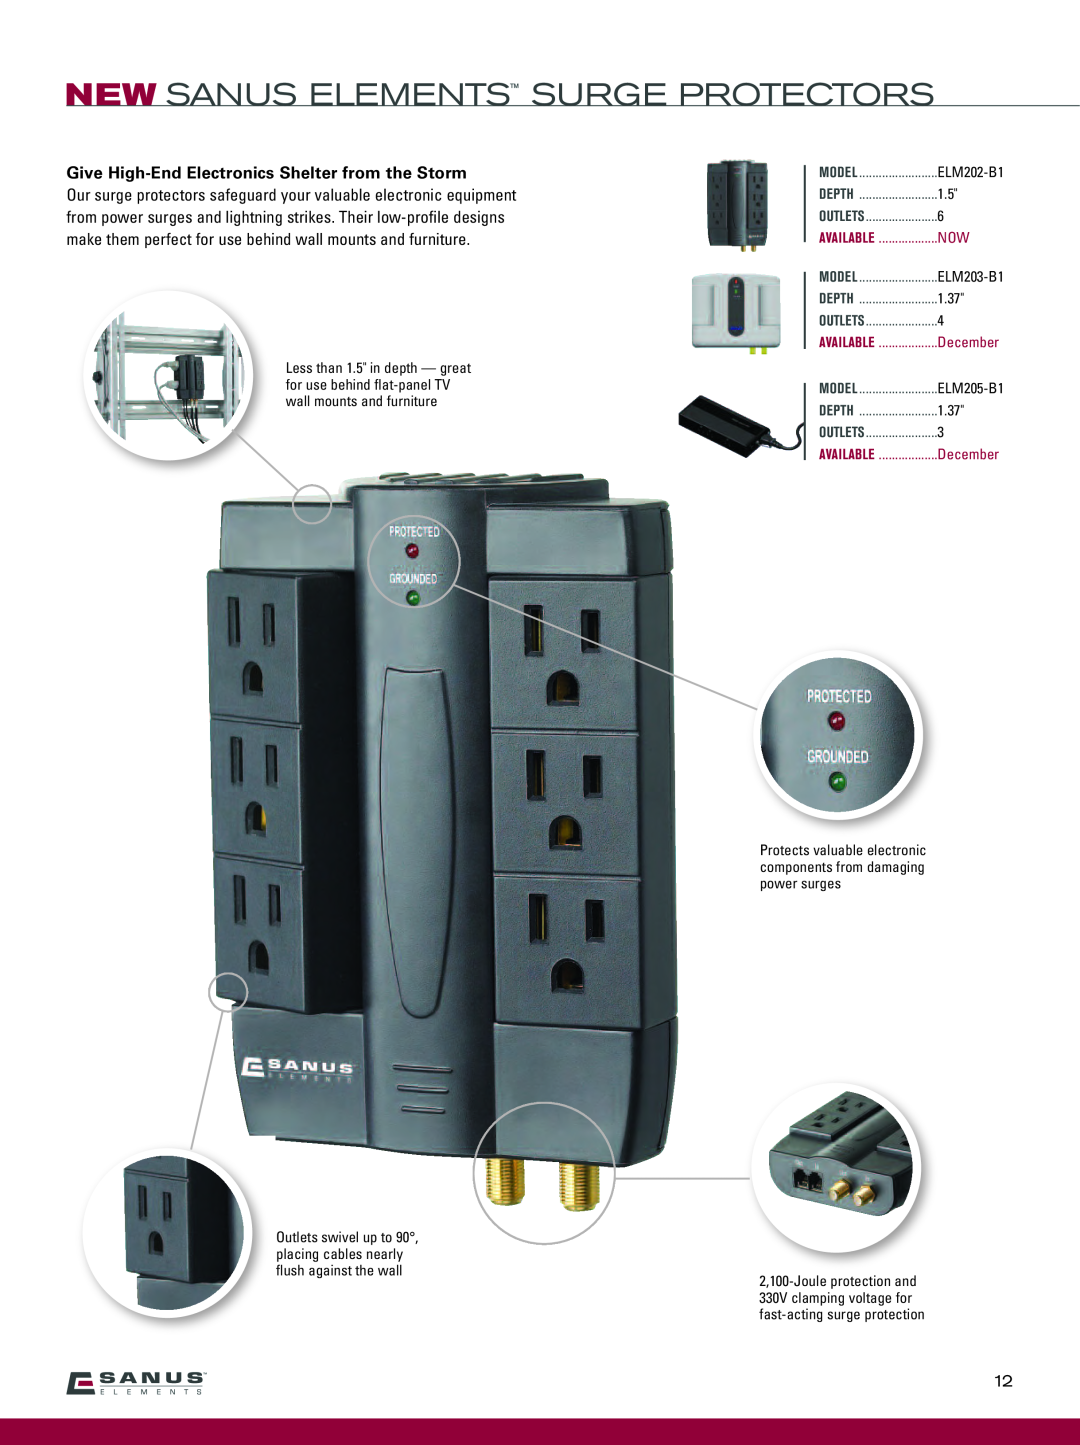 Sanus Systems VF2012-B1 manual New Sanus Elements Surge Protectors, Give High-EndElectronics Shelter from the Storm, 1.37 